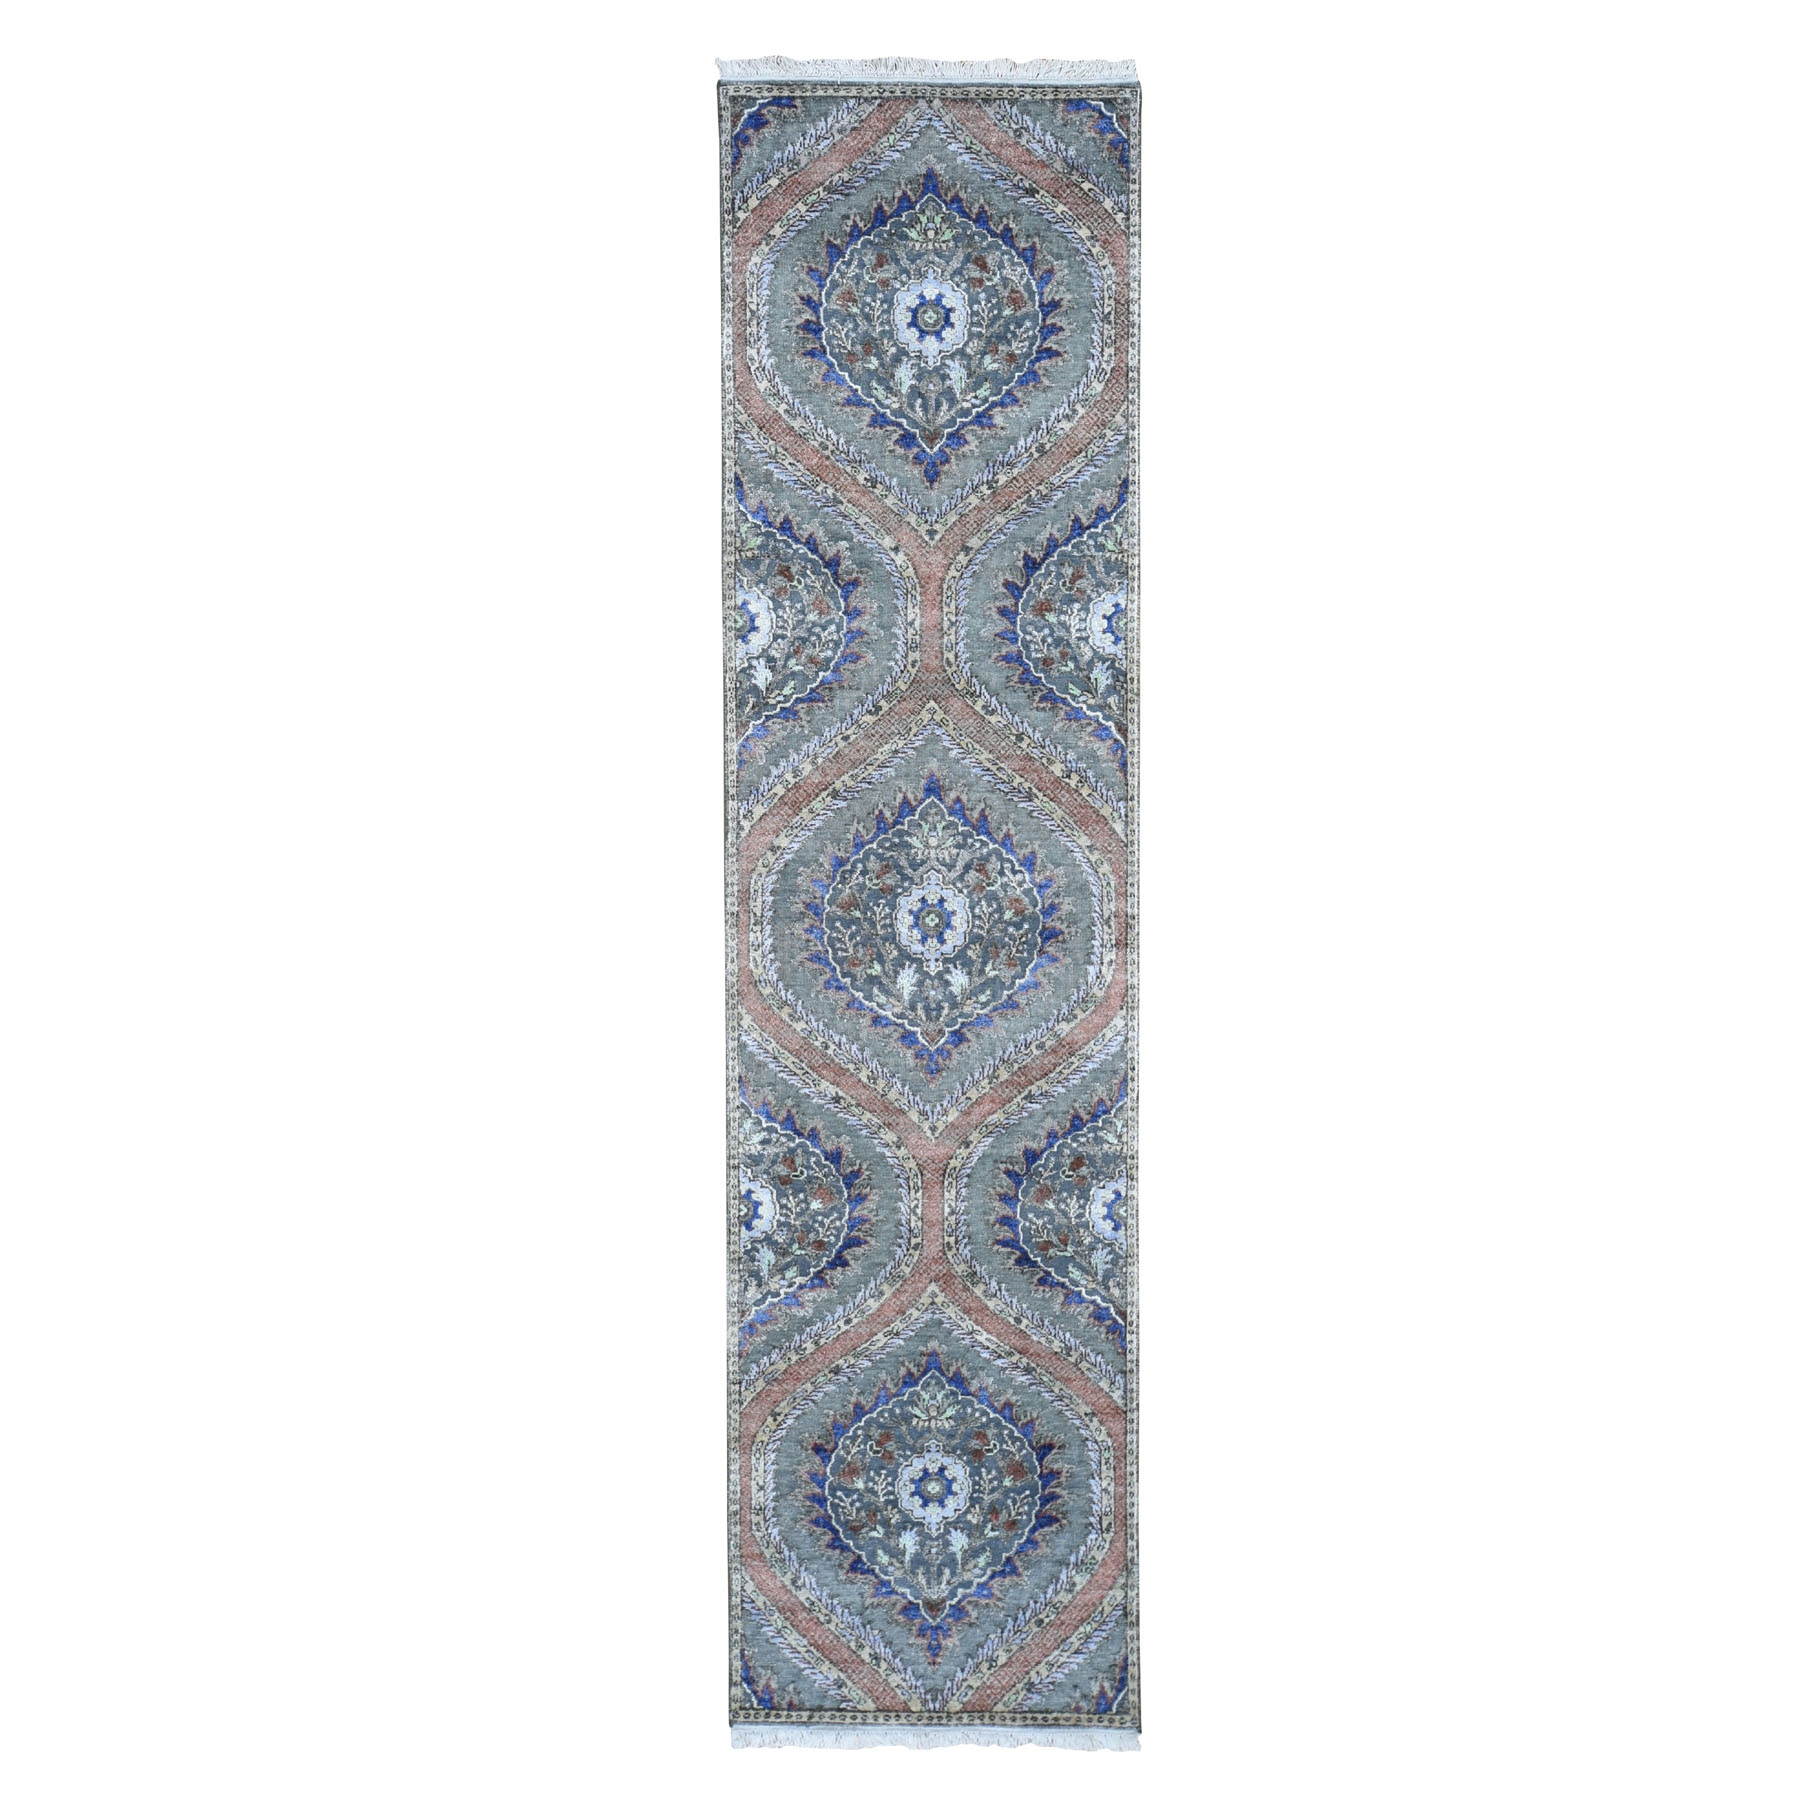 2'6"X10' Mughal Design Pure Silk With Textured Wool Runner Hand Knotted Oriental Rug moad8e9a